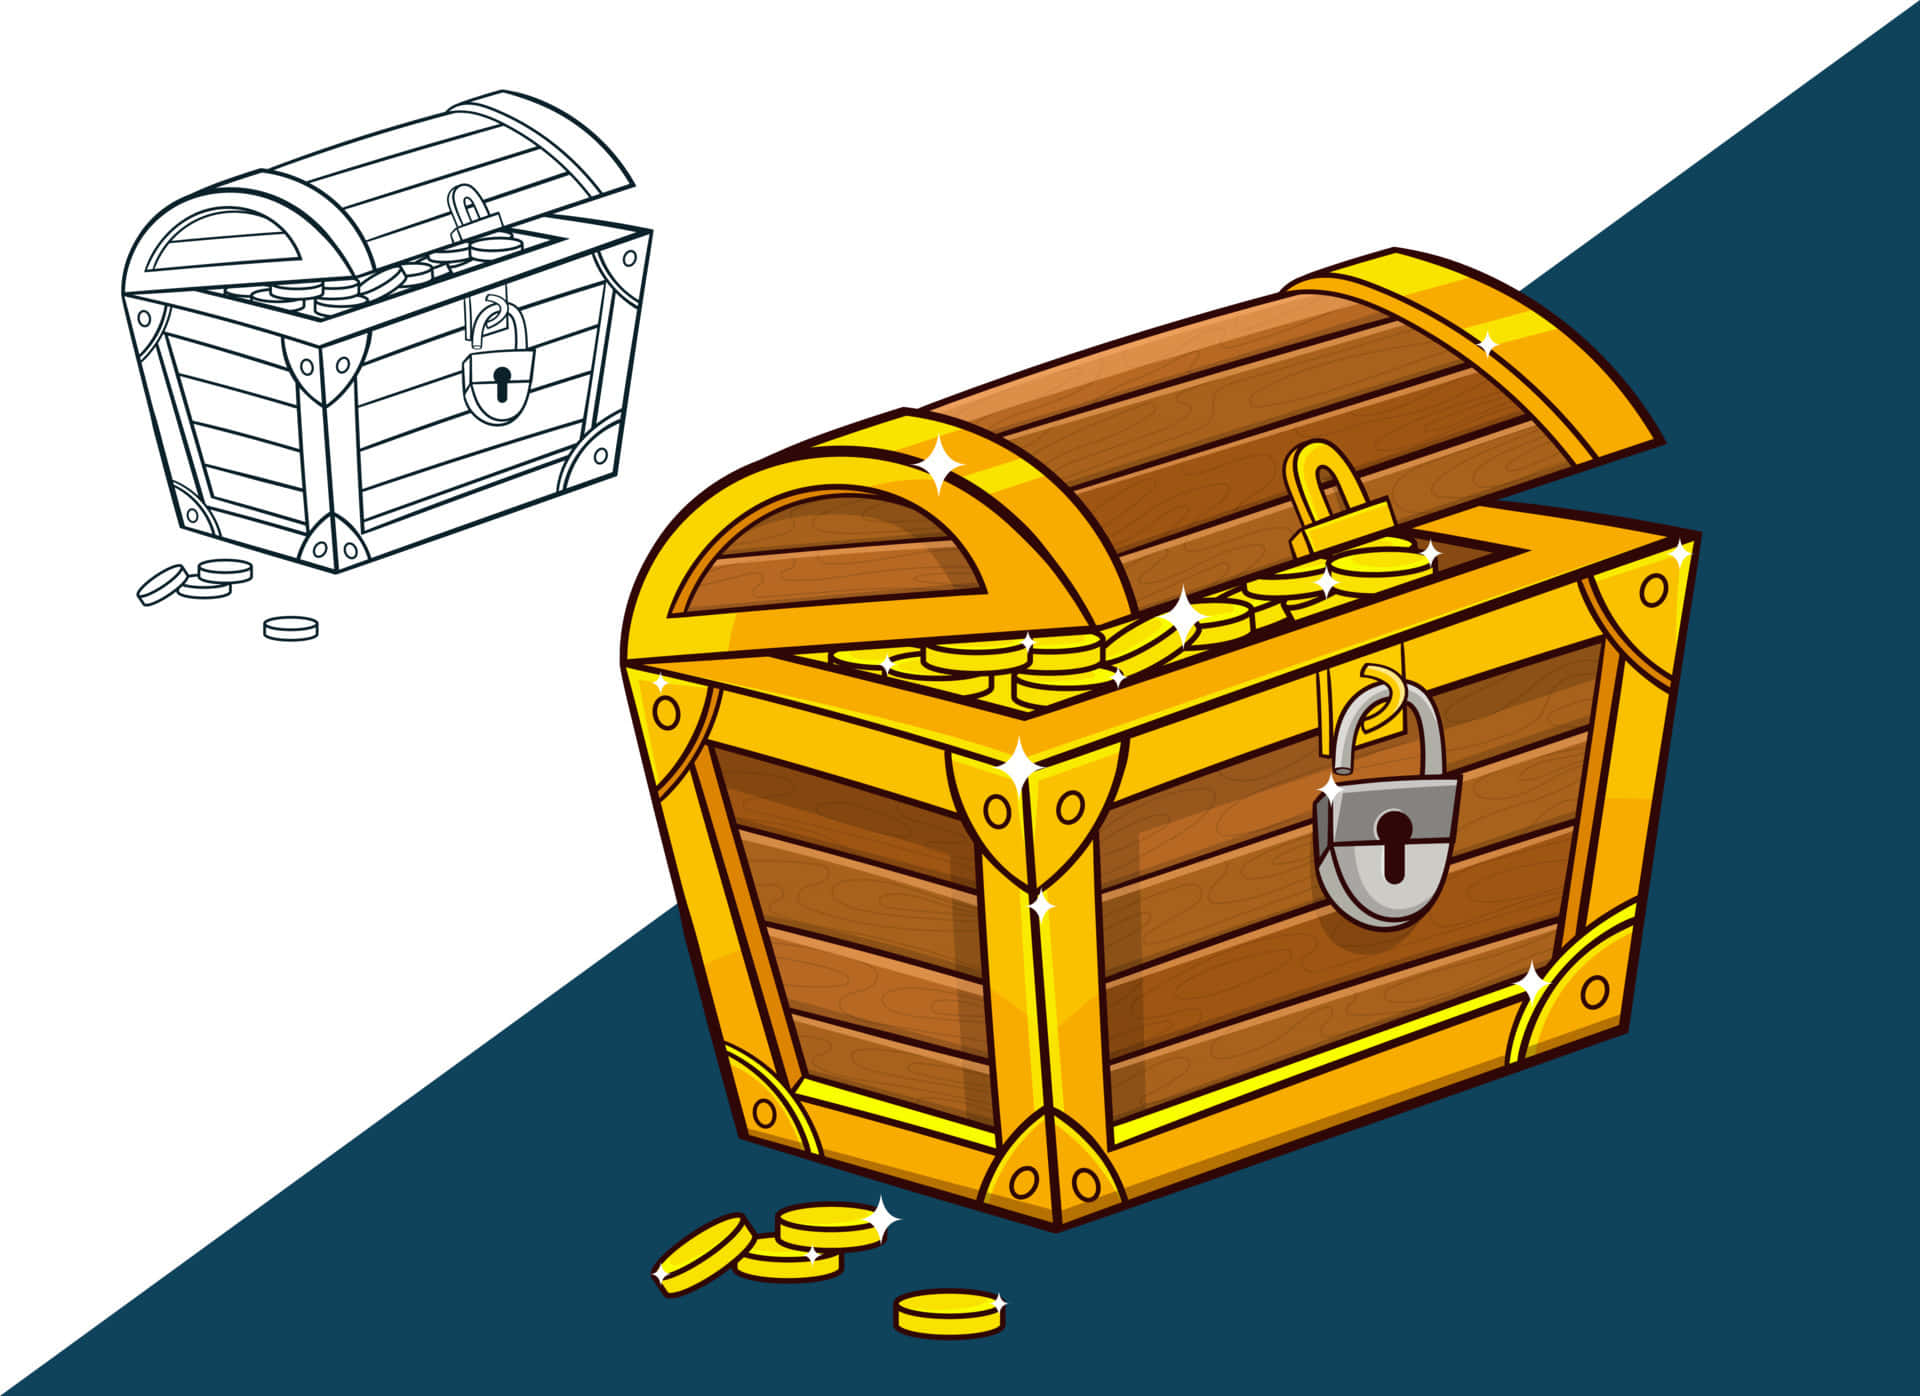 Treasure chest filled with gold and precious gems on an island